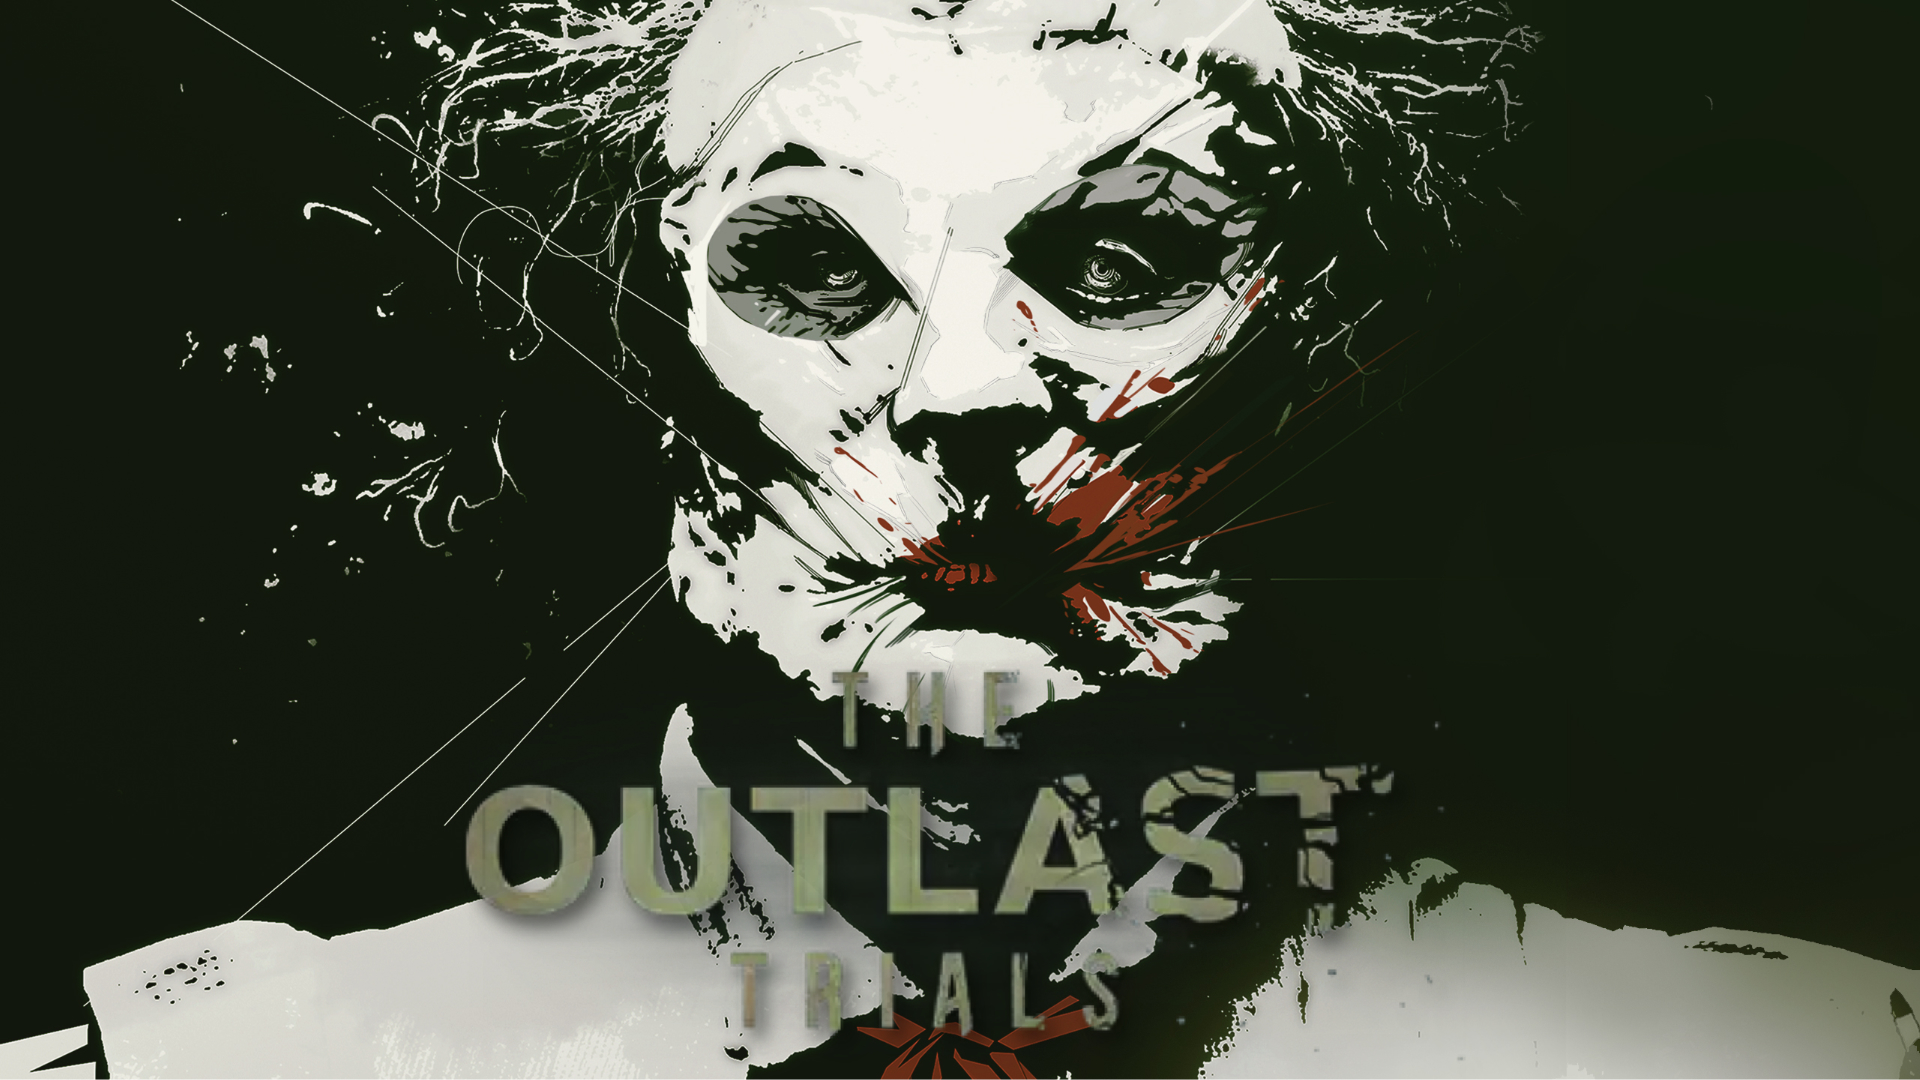 The Outlast Trials, PC